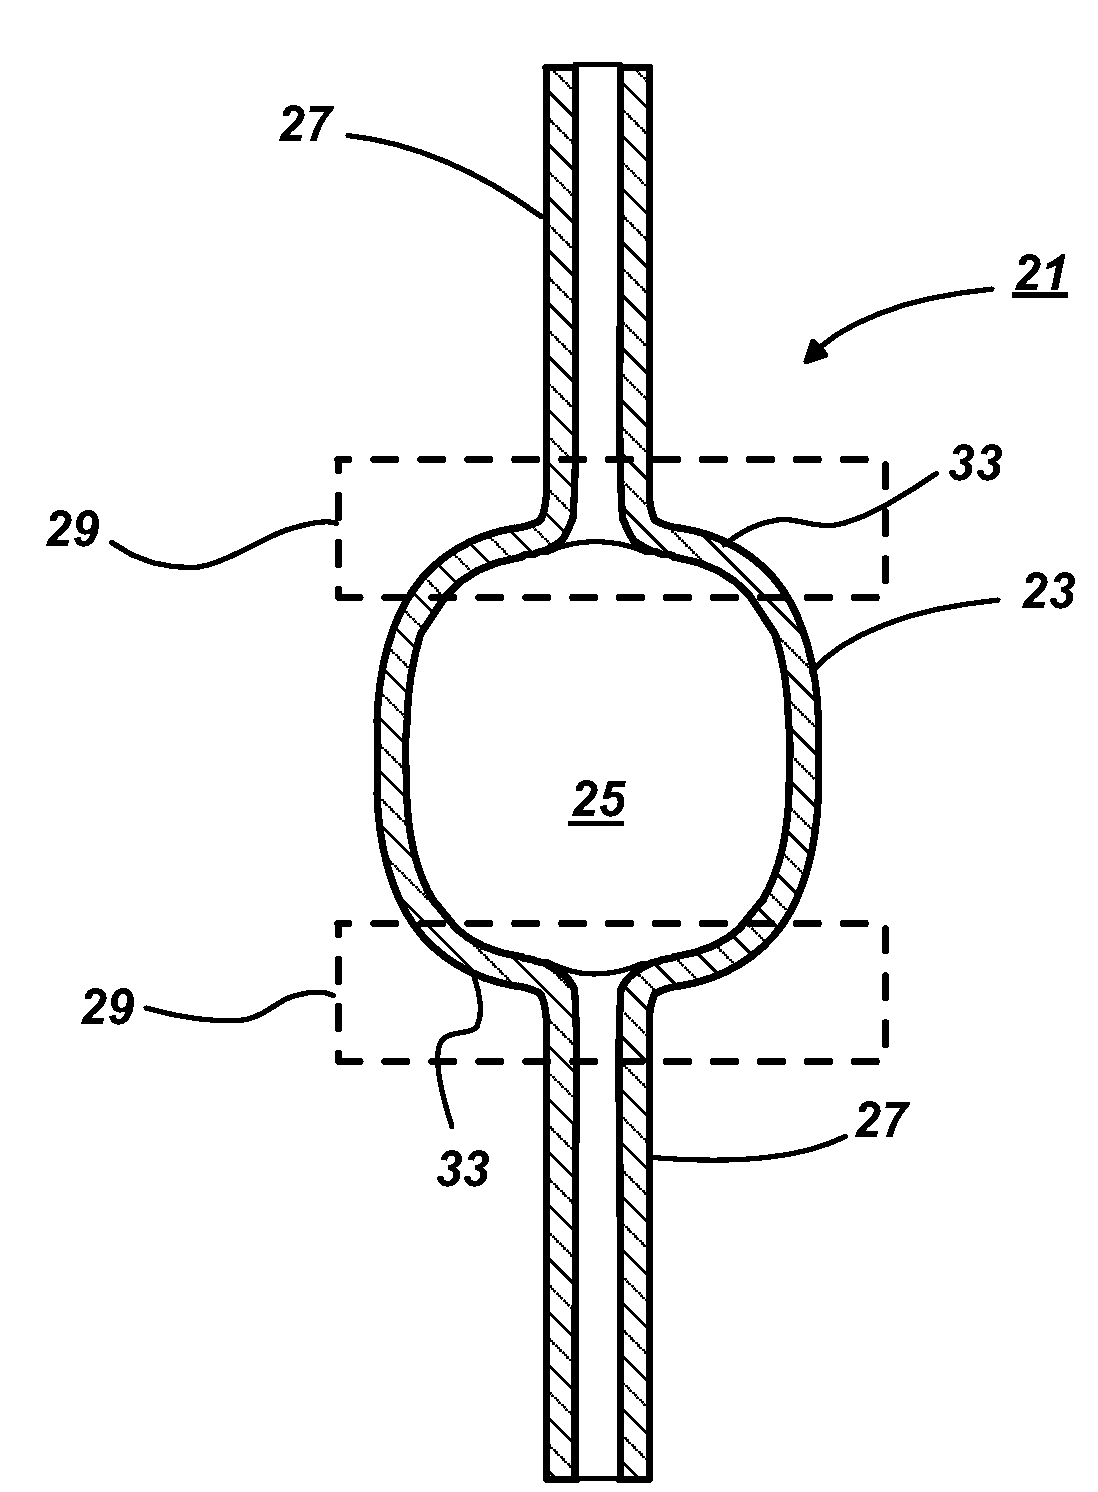 Ceramic Discharge Vessel Having an Opaque Zone and Method of Making Same